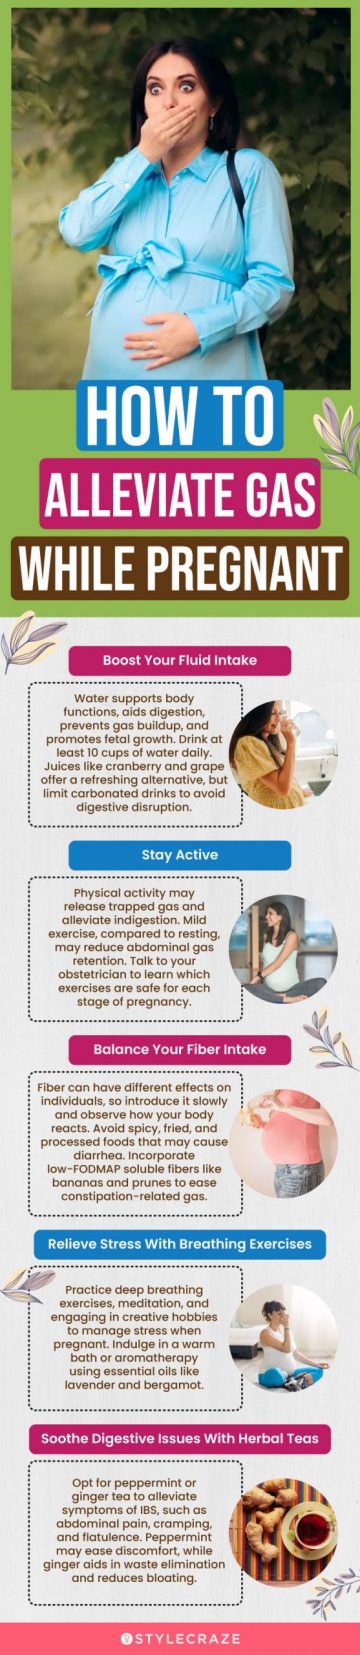 how to alleviate pregnancy gas (infographic)